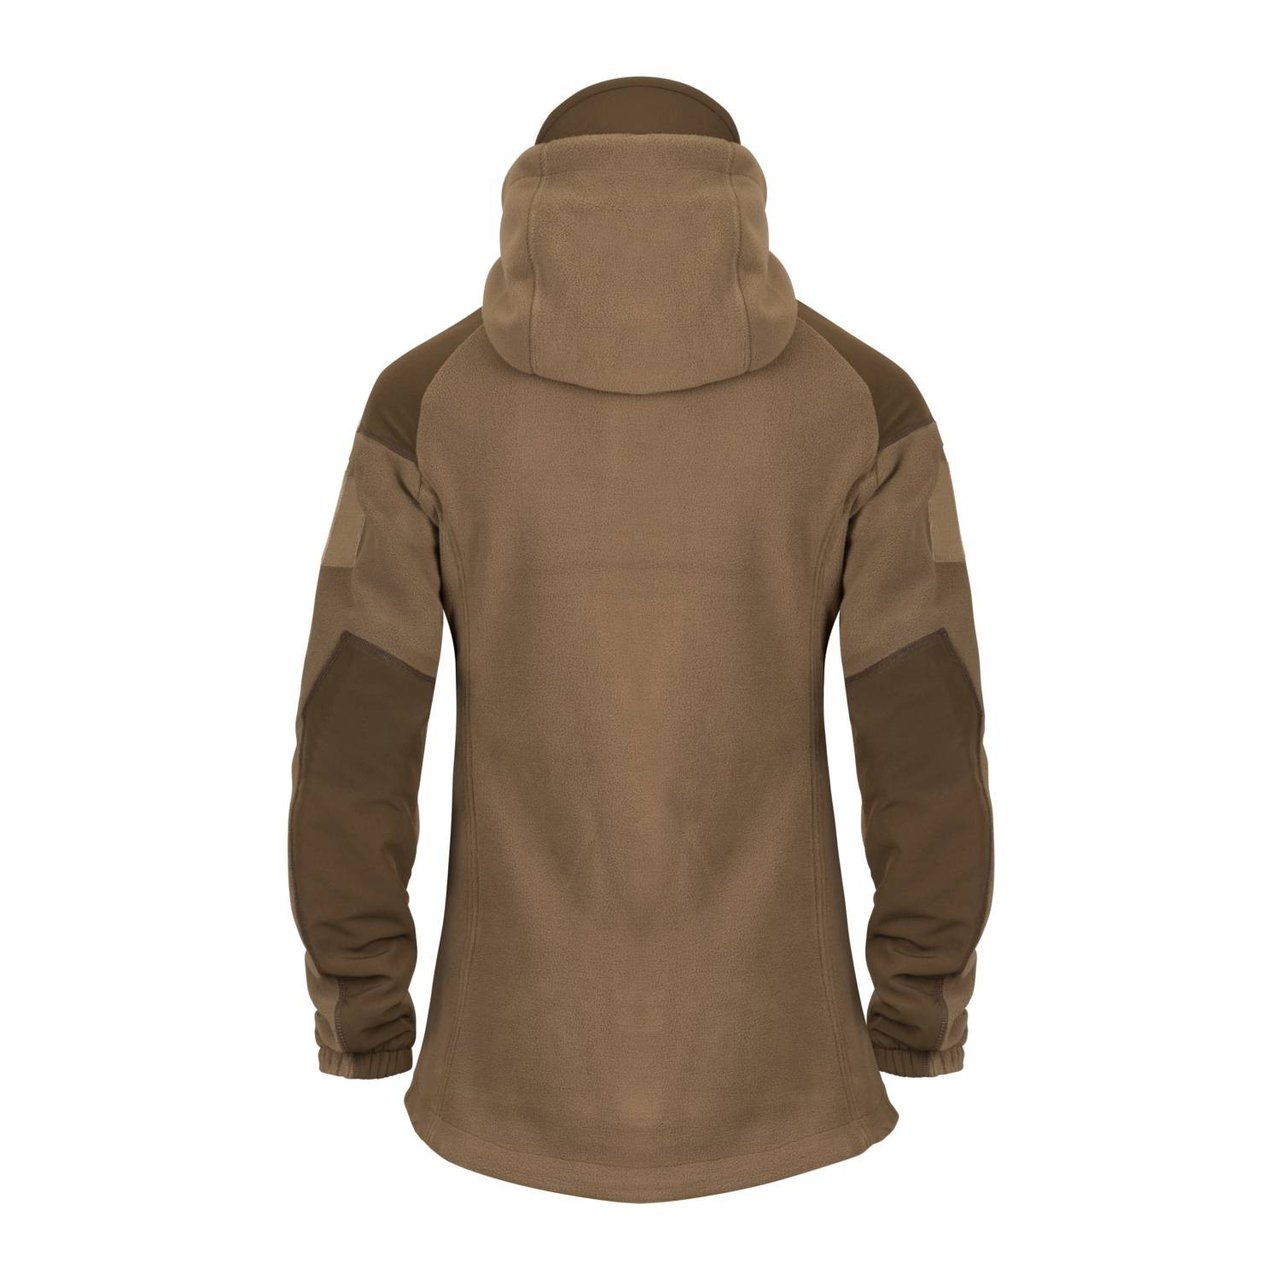 Clothing, www.militarysurplusworld.com prices Navy variety | Army - Gear Military Tactical Surplus & Boots, - Surplus, Big Outdoor | Tactical | Law Cheap Enforcement,